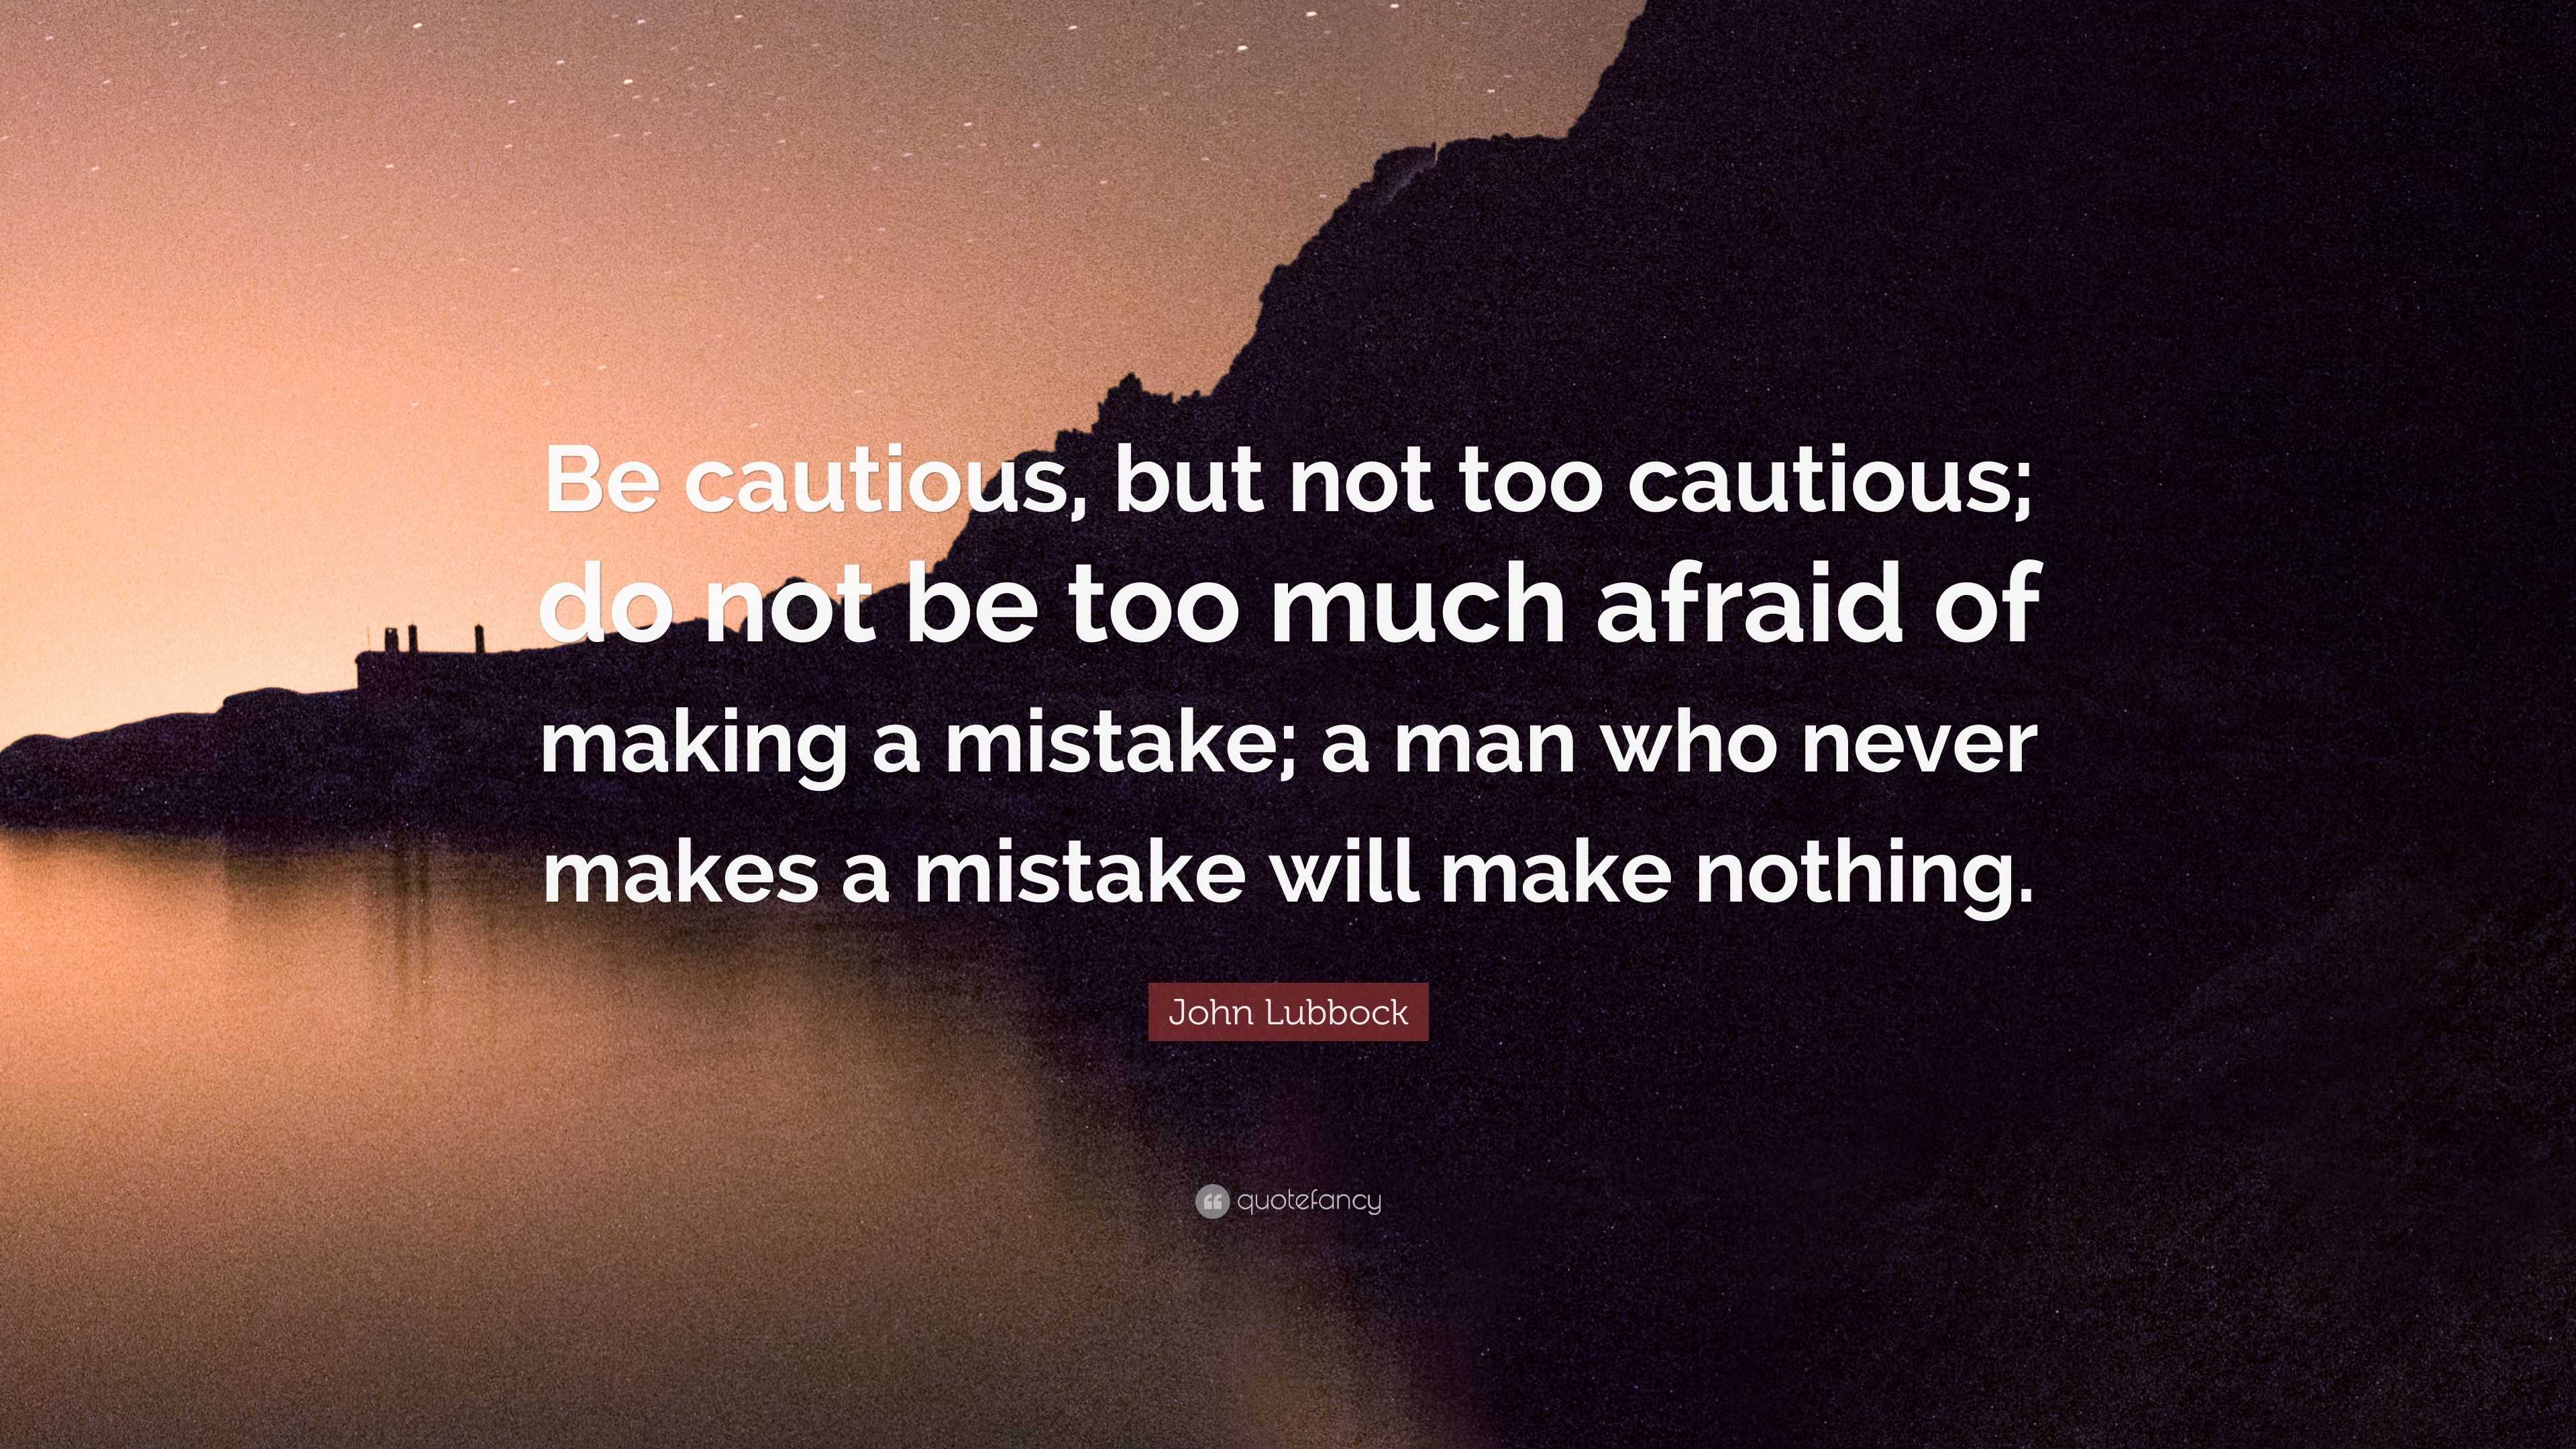 John Lubbock Quote: “Be cautious, but not too cautious; do not be too ...